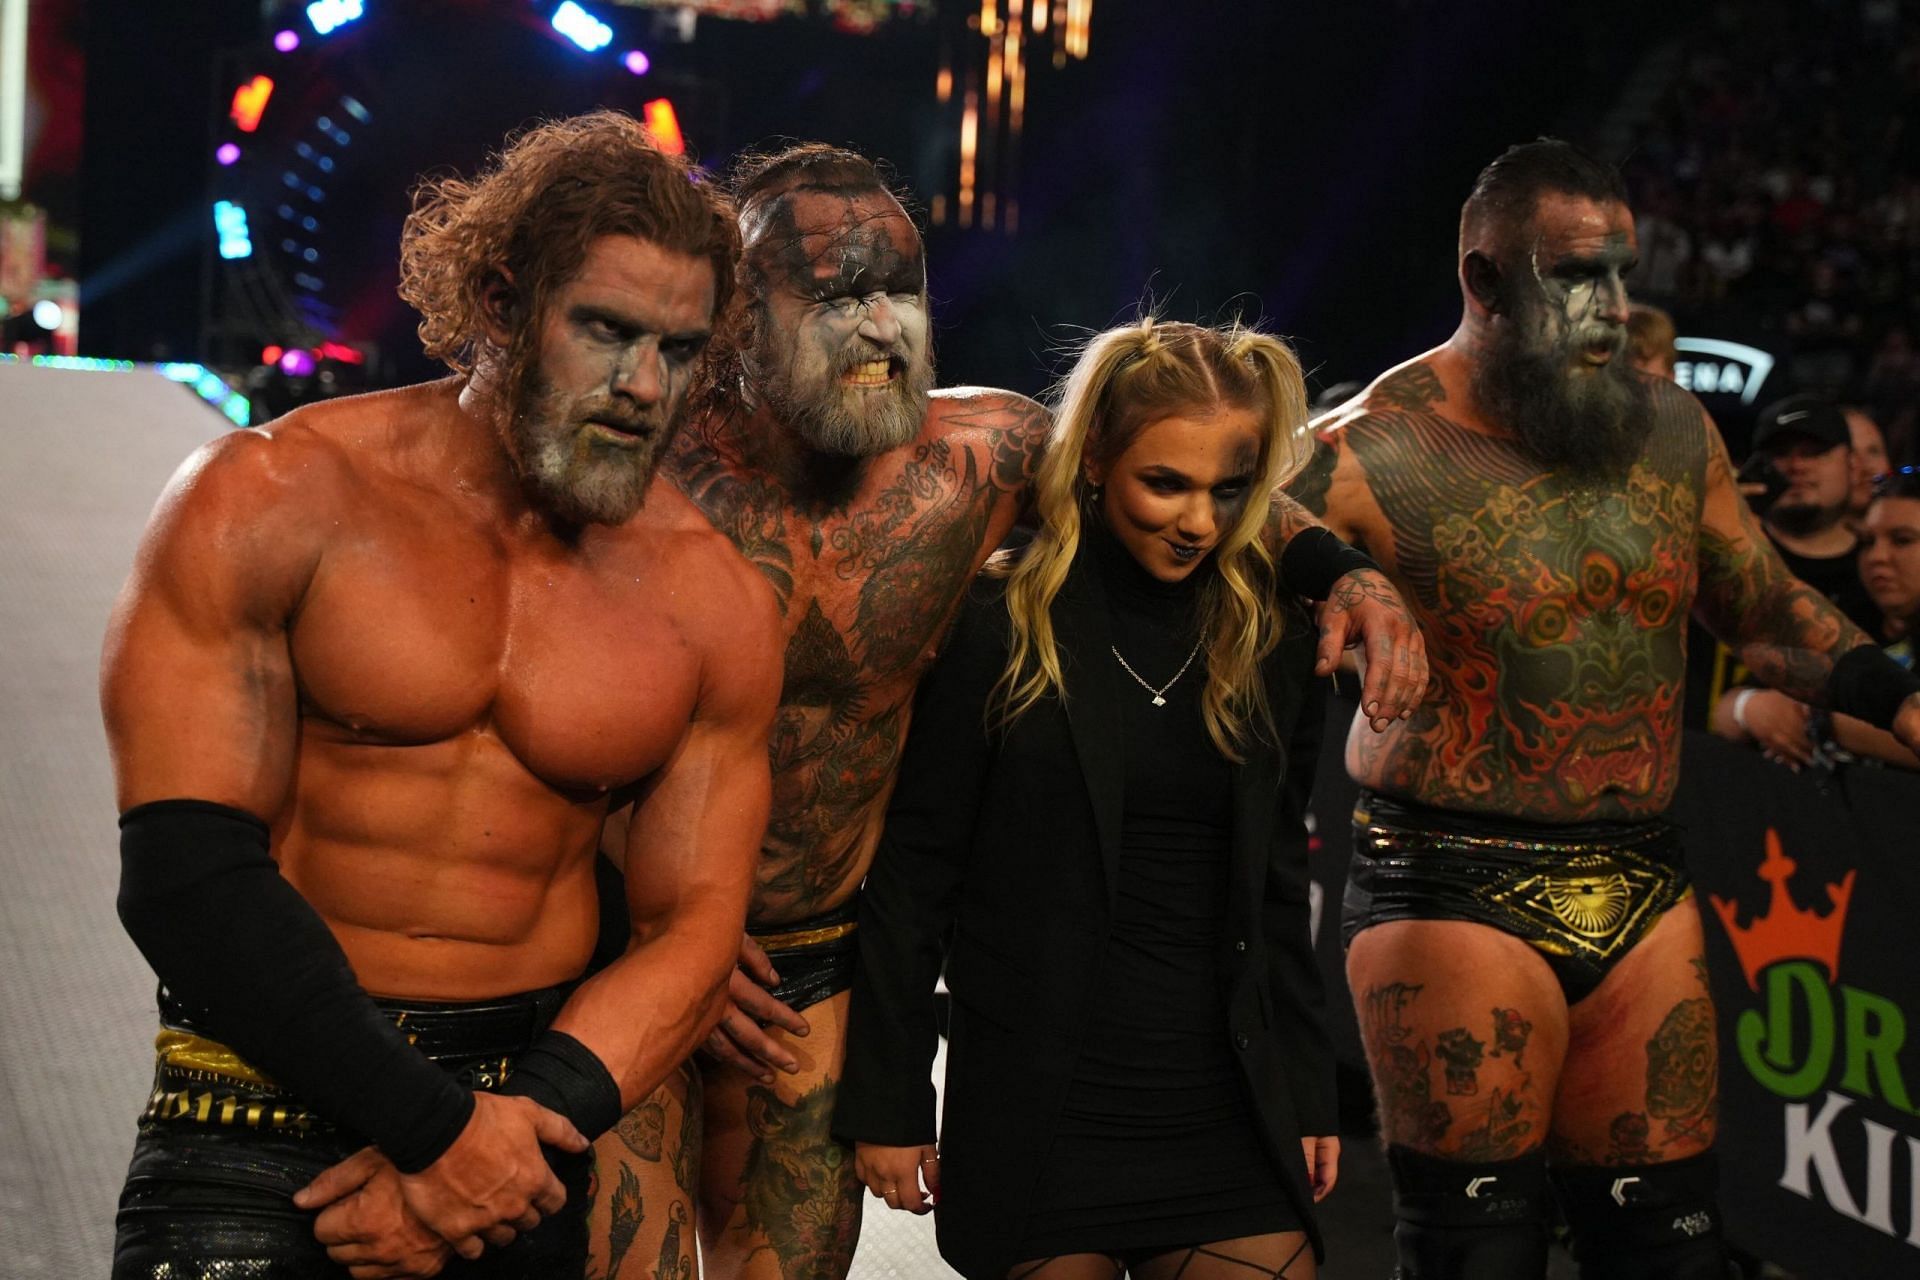 House of Black have been a terrifying presence on AEW